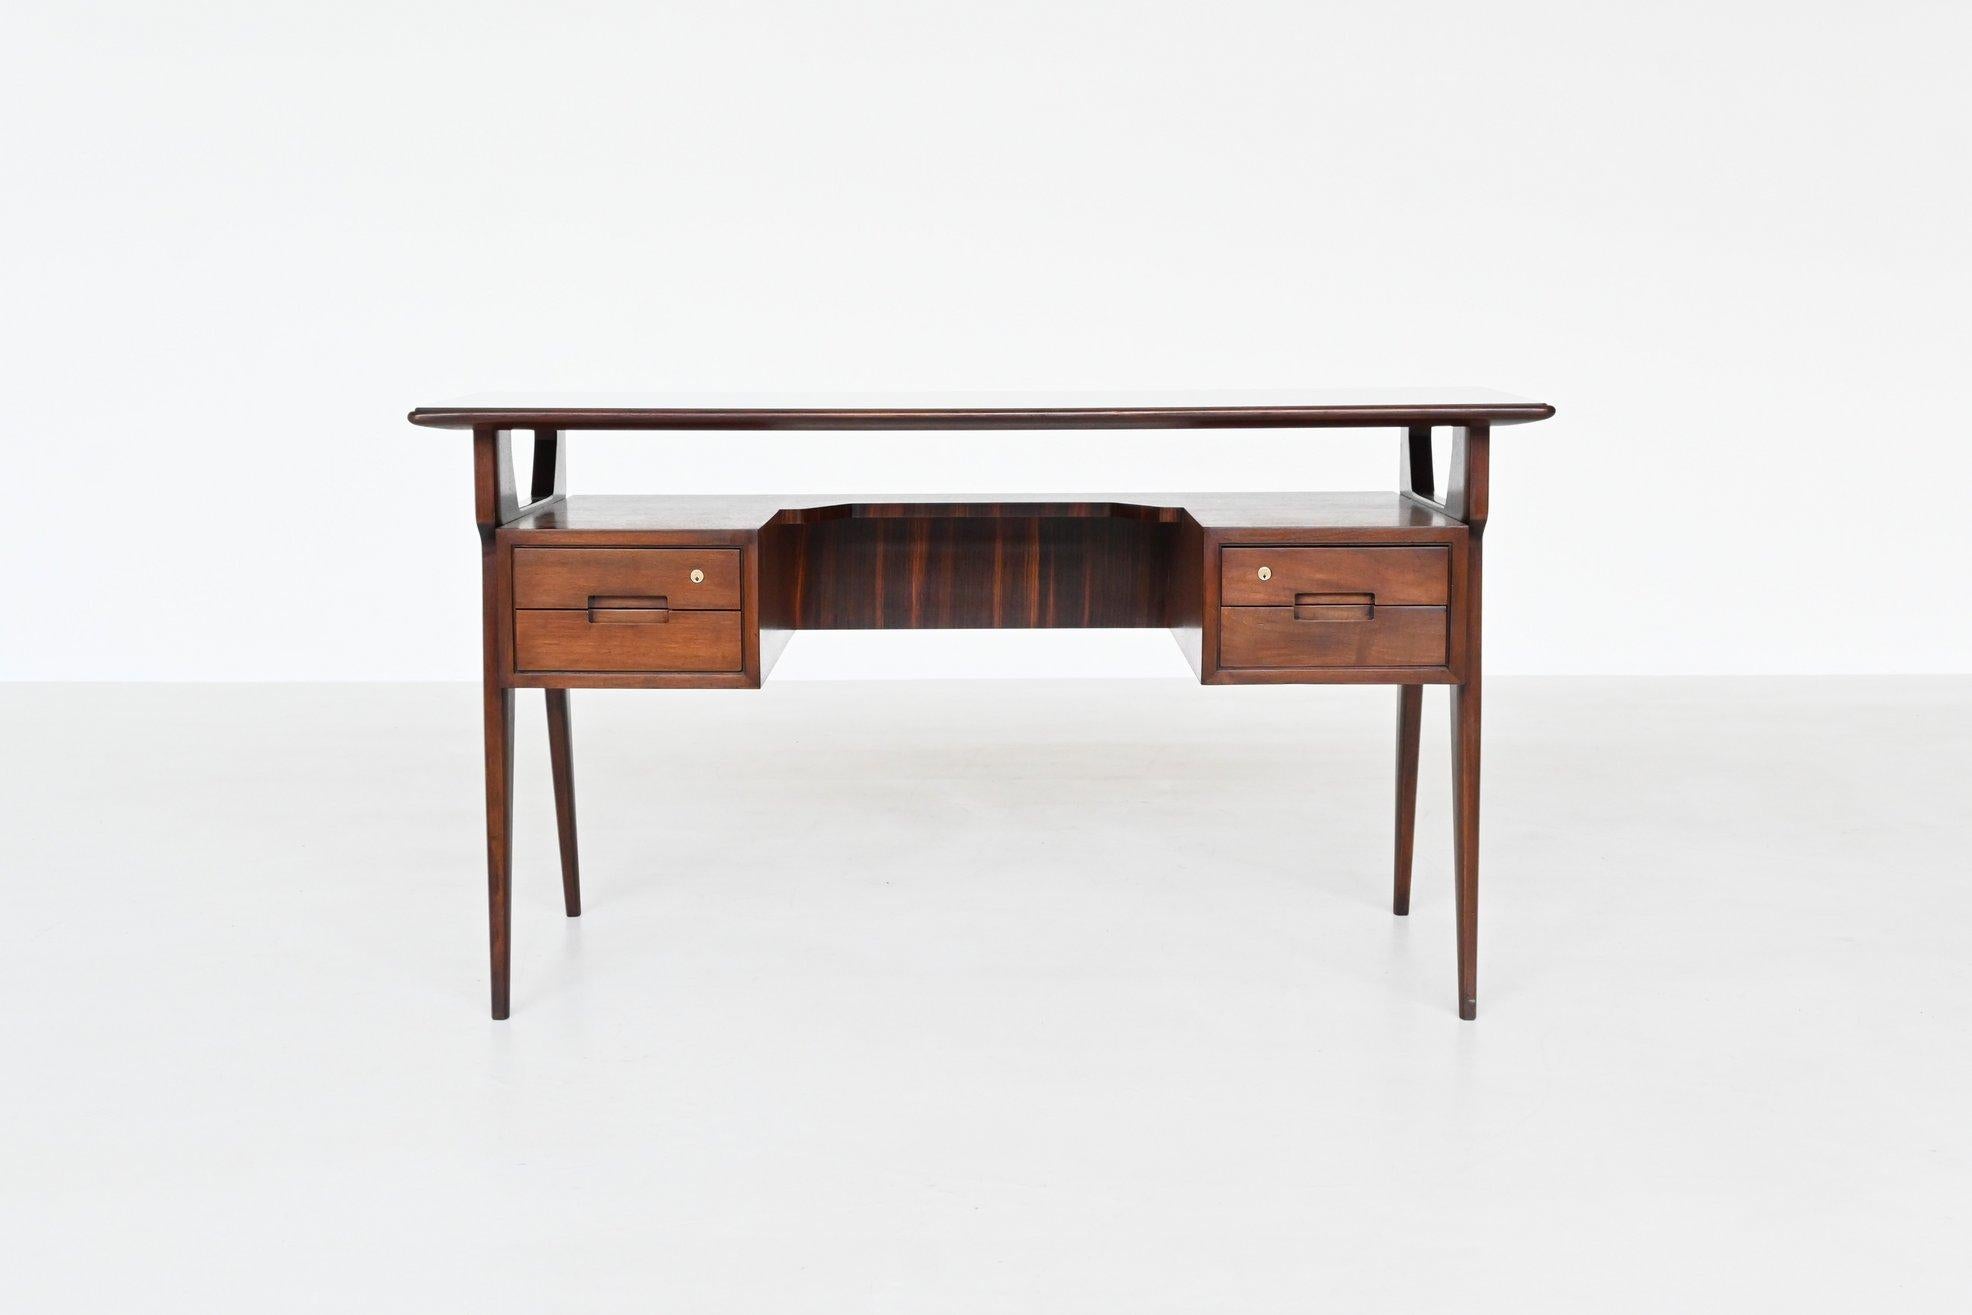 Beautiful elegant shaped writing desk manufactured by Mobili Barovero Torino, Italy 1960. The body is made of nicely grained rosewood and the top is made of inlayed black finished glass. This symmetric boomerang shaped desk has two deep drawers on